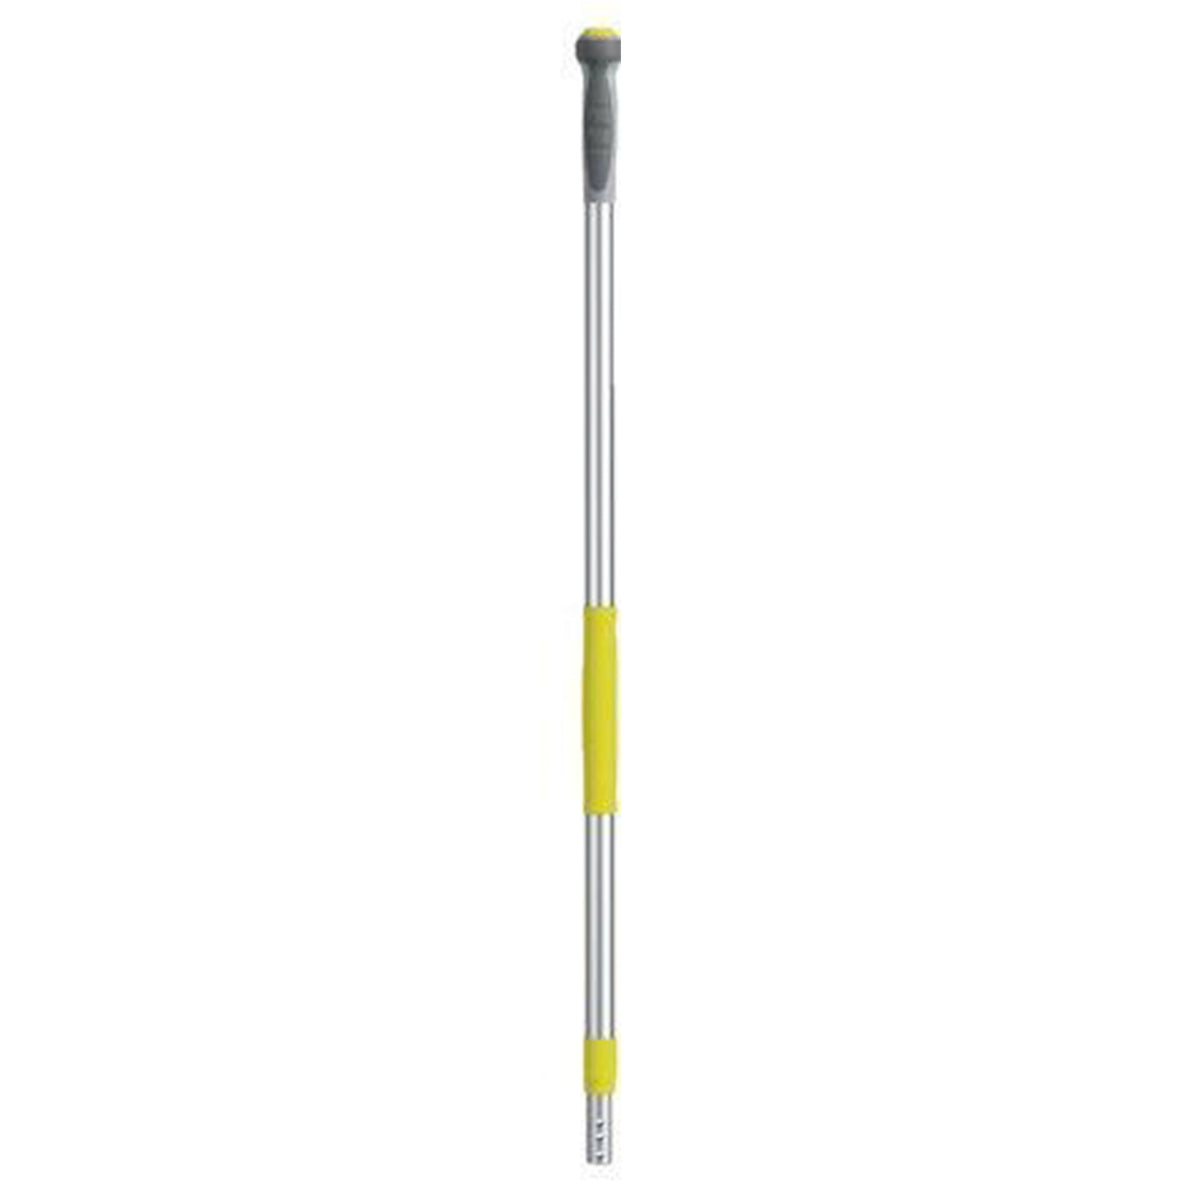 STAINLESS STEEL MOP HANDLE - BLUE